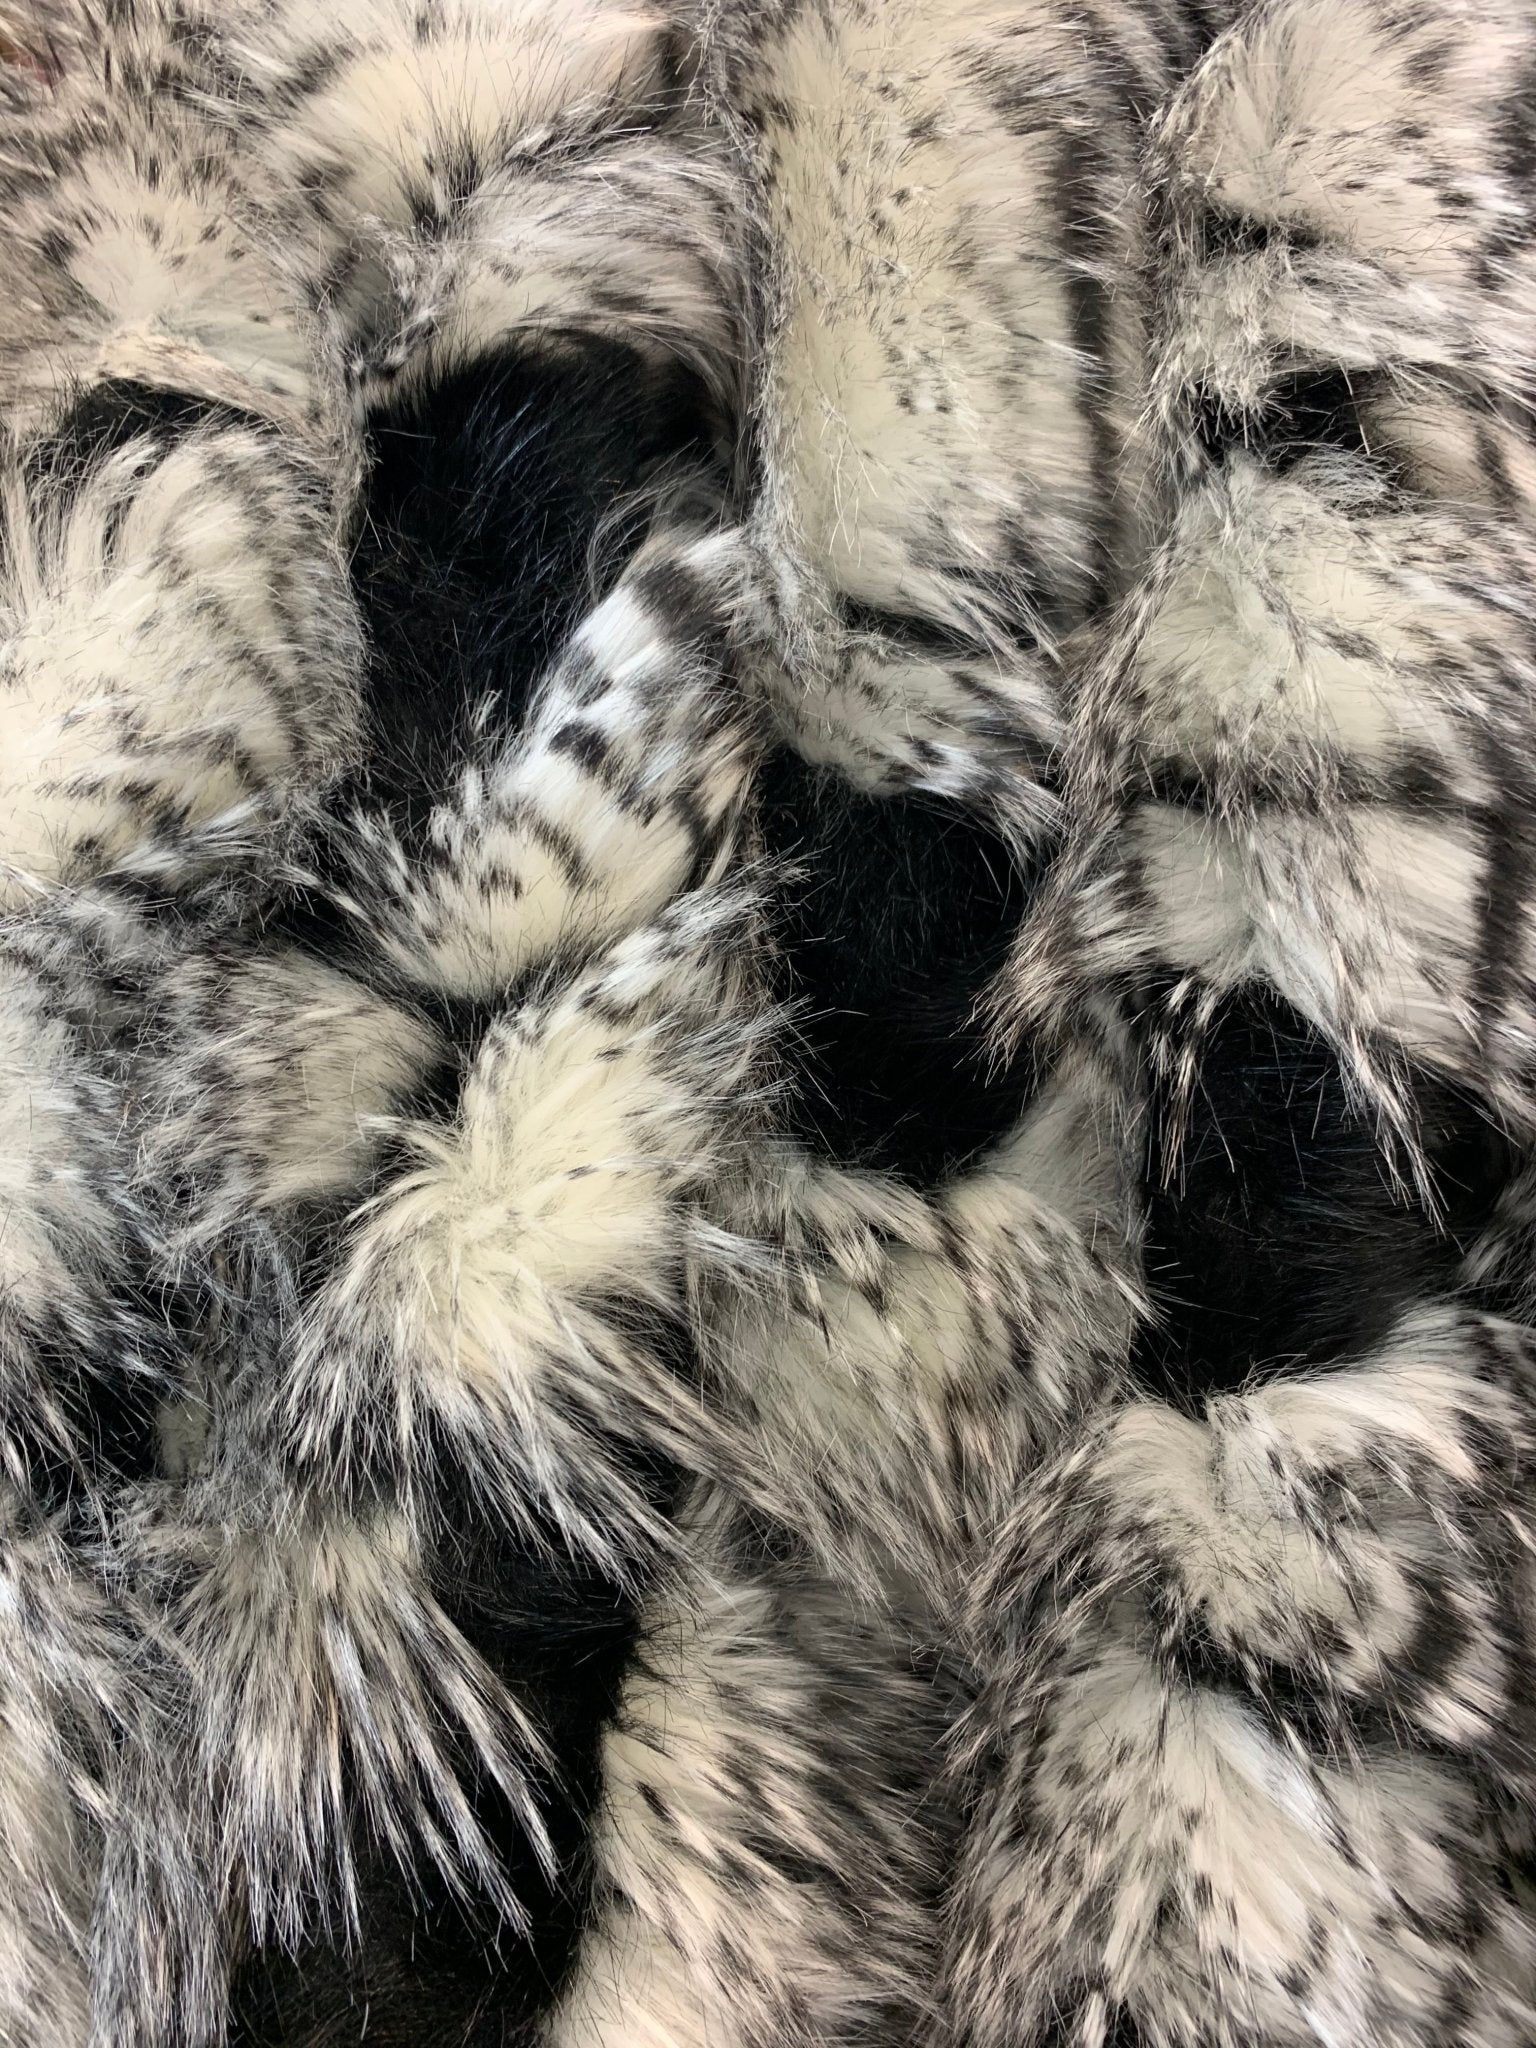 Faux Fake Fur Feathered Bird Long Pile Fabric | Faux Fur MaterialICEFABRICICE FABRICSGrayBy The Yard (60 inches Wide)Faux Fake Fur Feathered Bird Long Pile Fabric | Faux Fur Material ICEFABRIC Gray